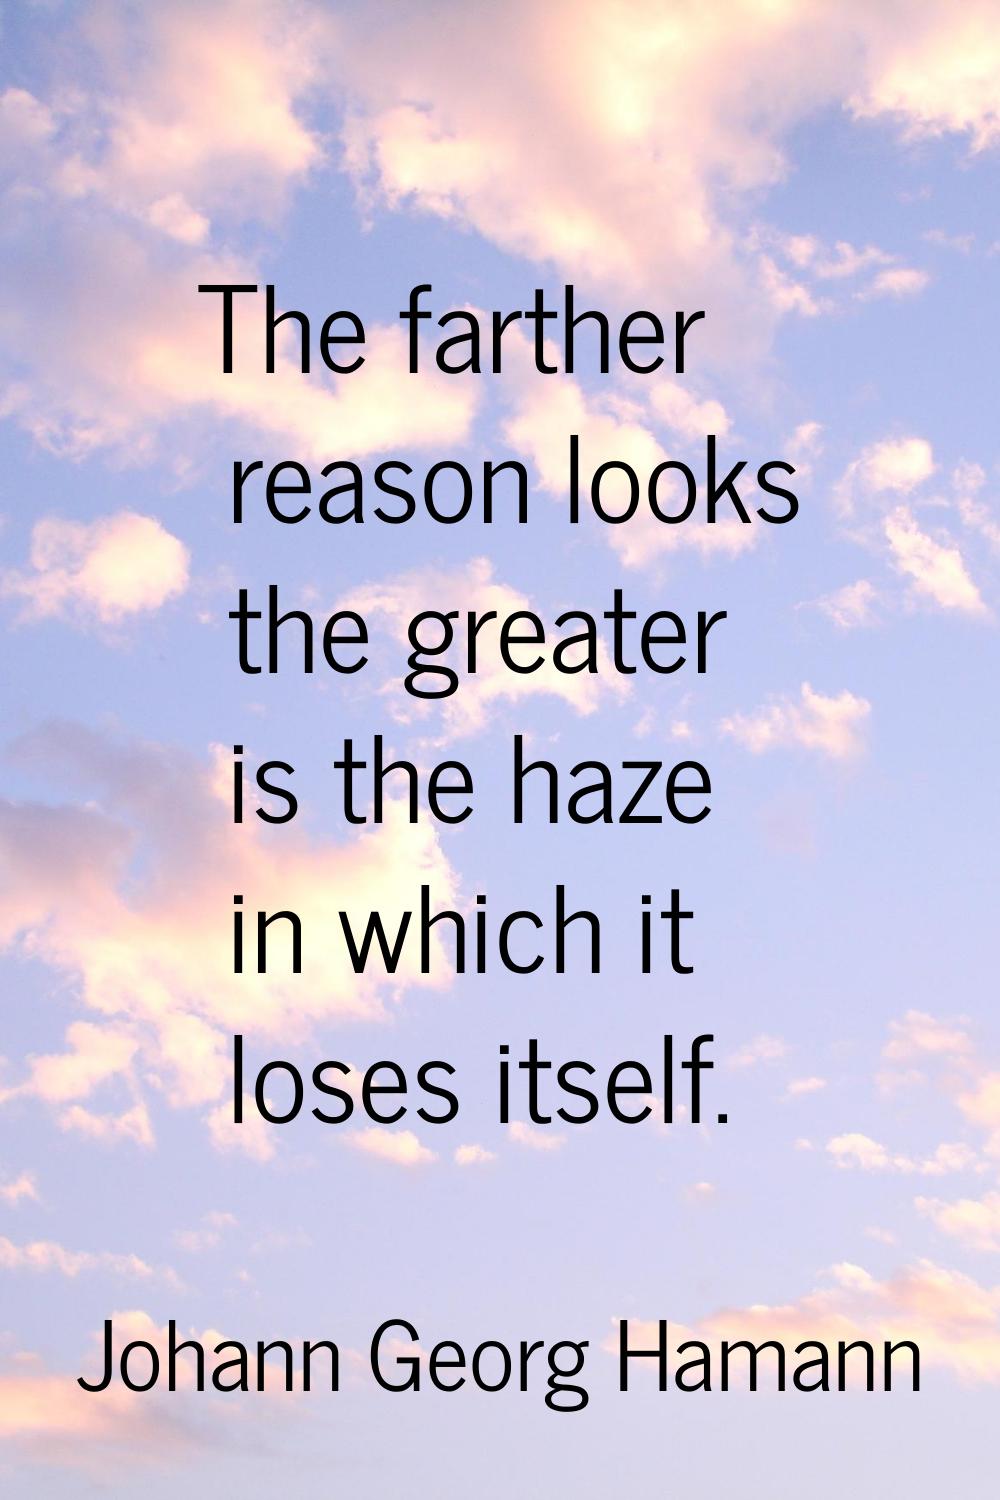 The farther reason looks the greater is the haze in which it loses itself.